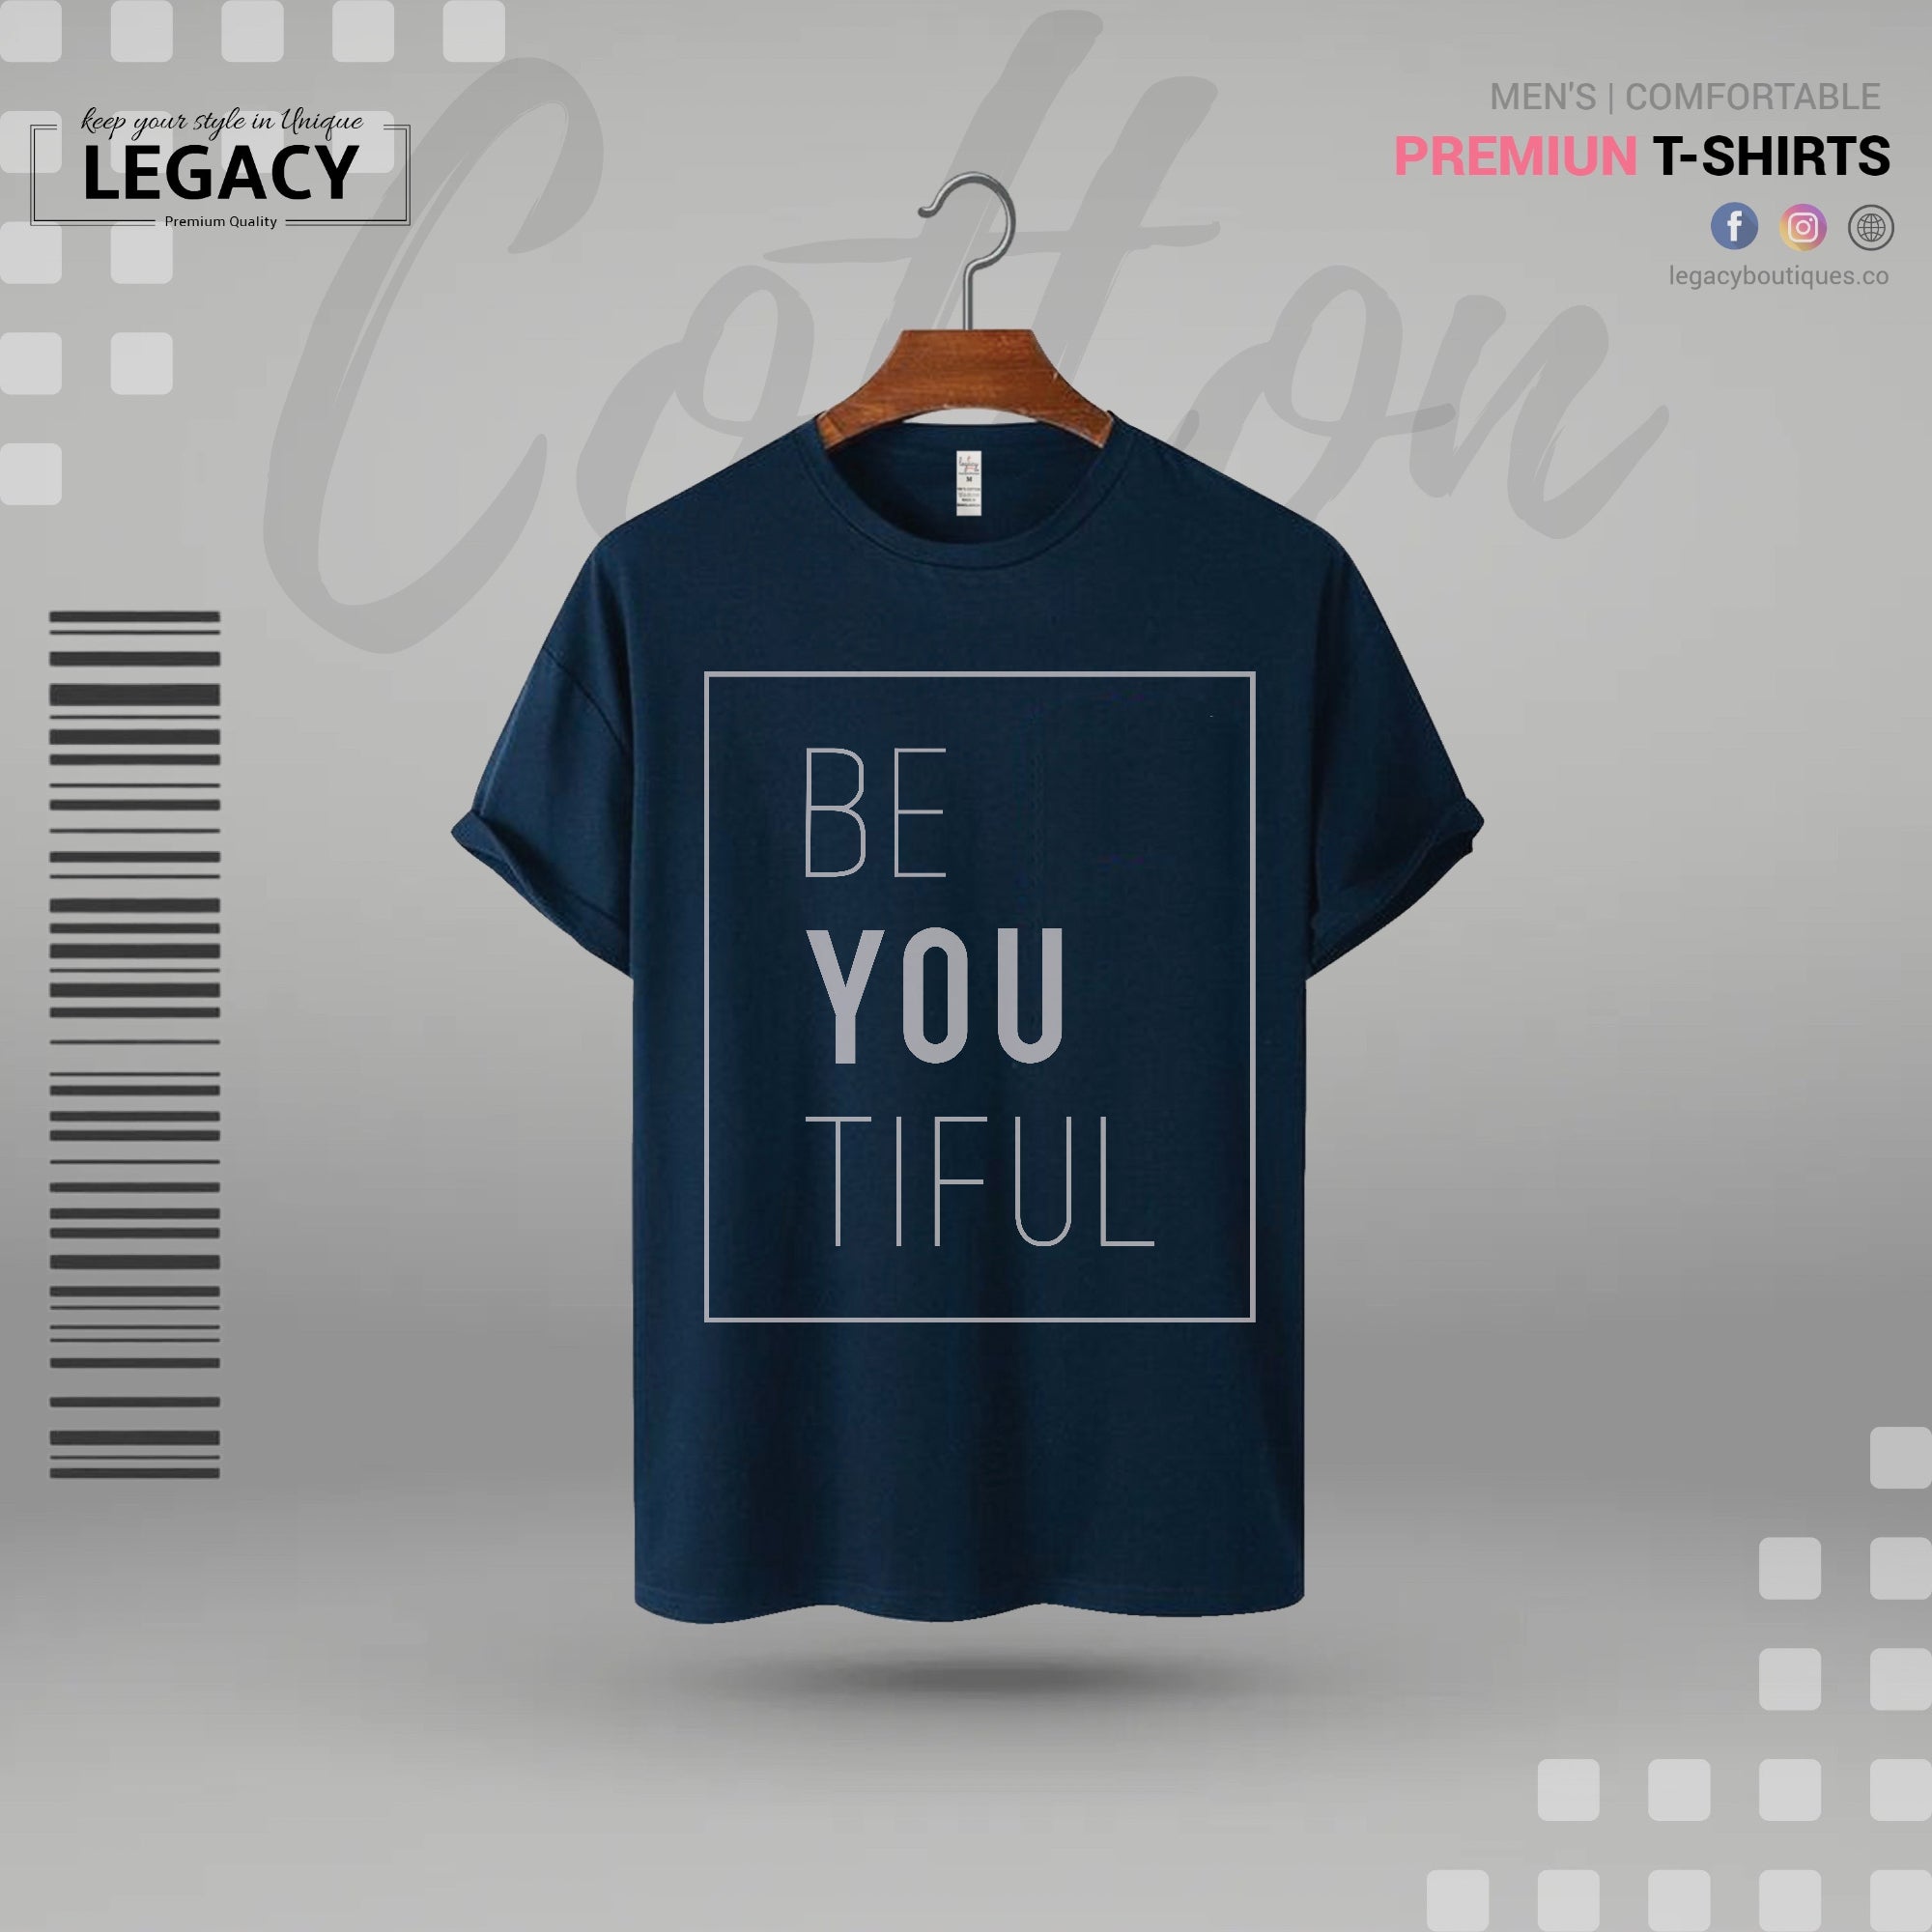 Mens T Shirt For Man - Legacy Boutiques